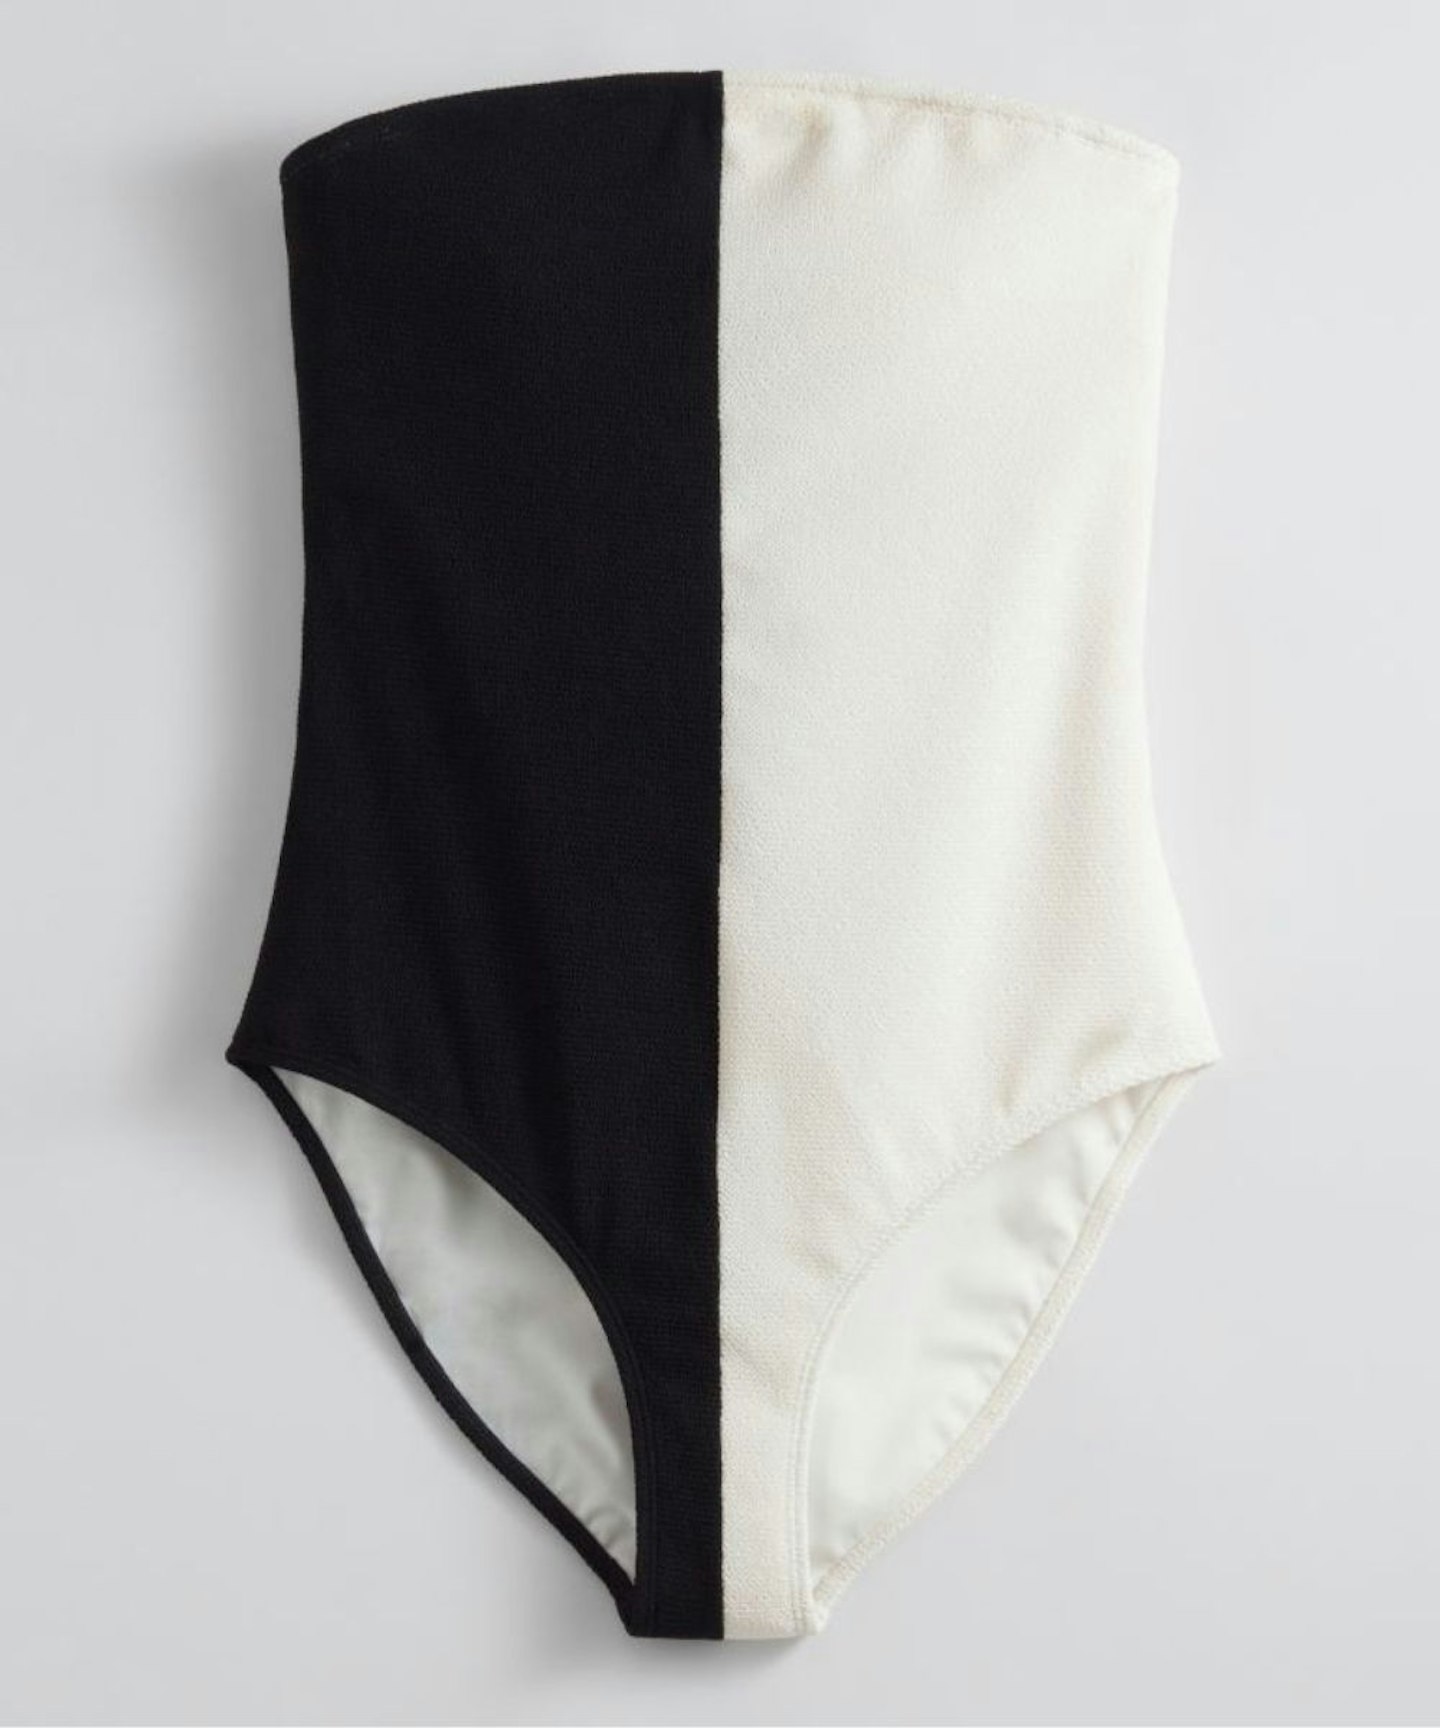 Two-Tone Bandeau Swimsuit